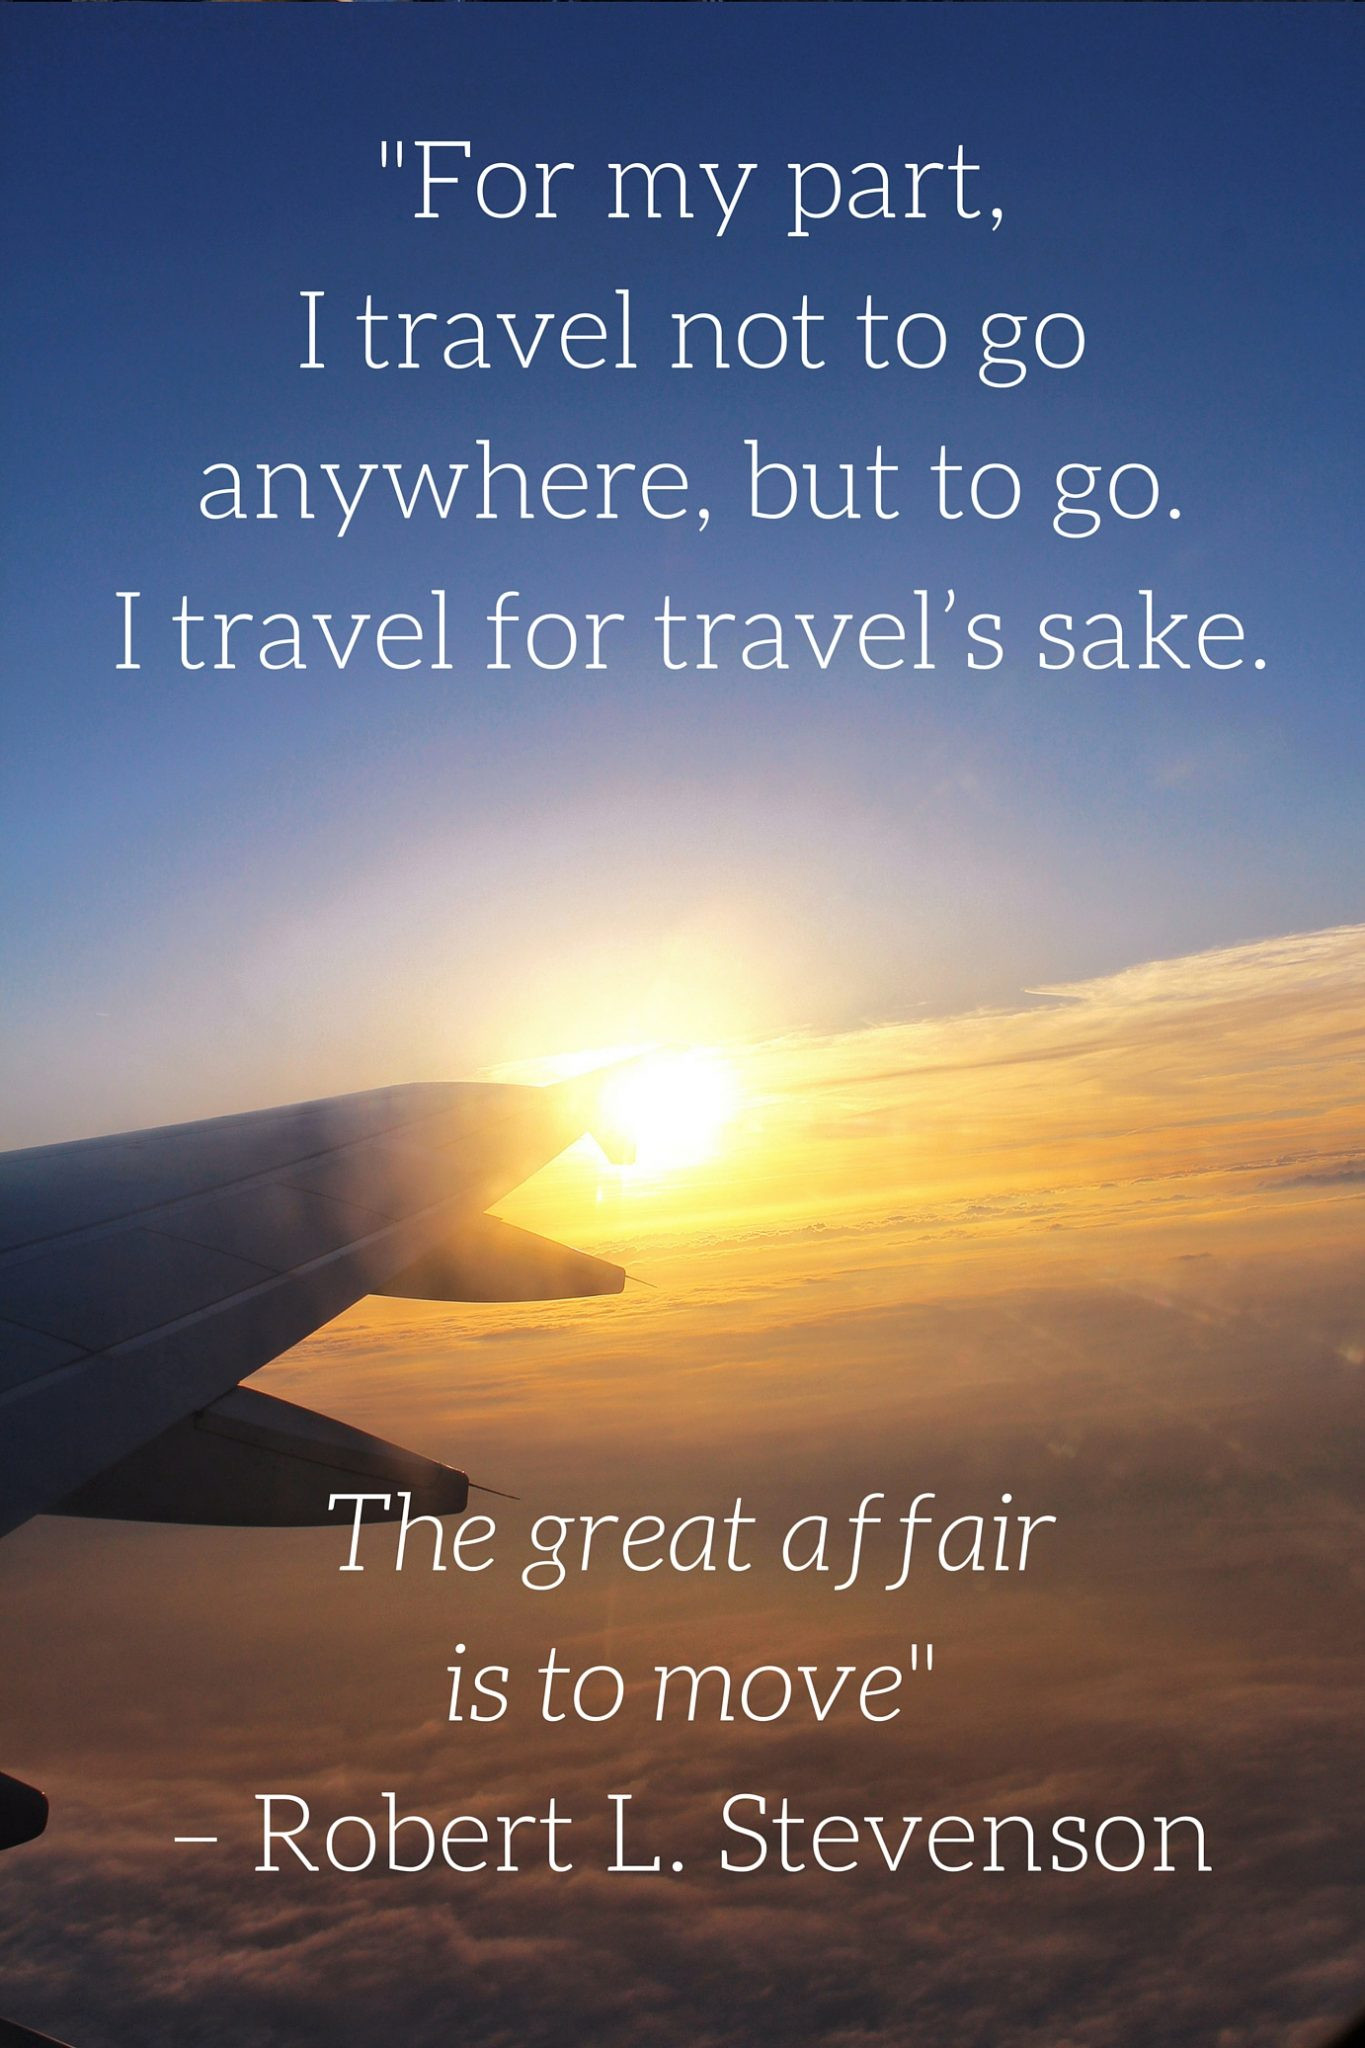 Motivational Quote Images
 12 Travel Quotes That Will Inspire You to Travel More